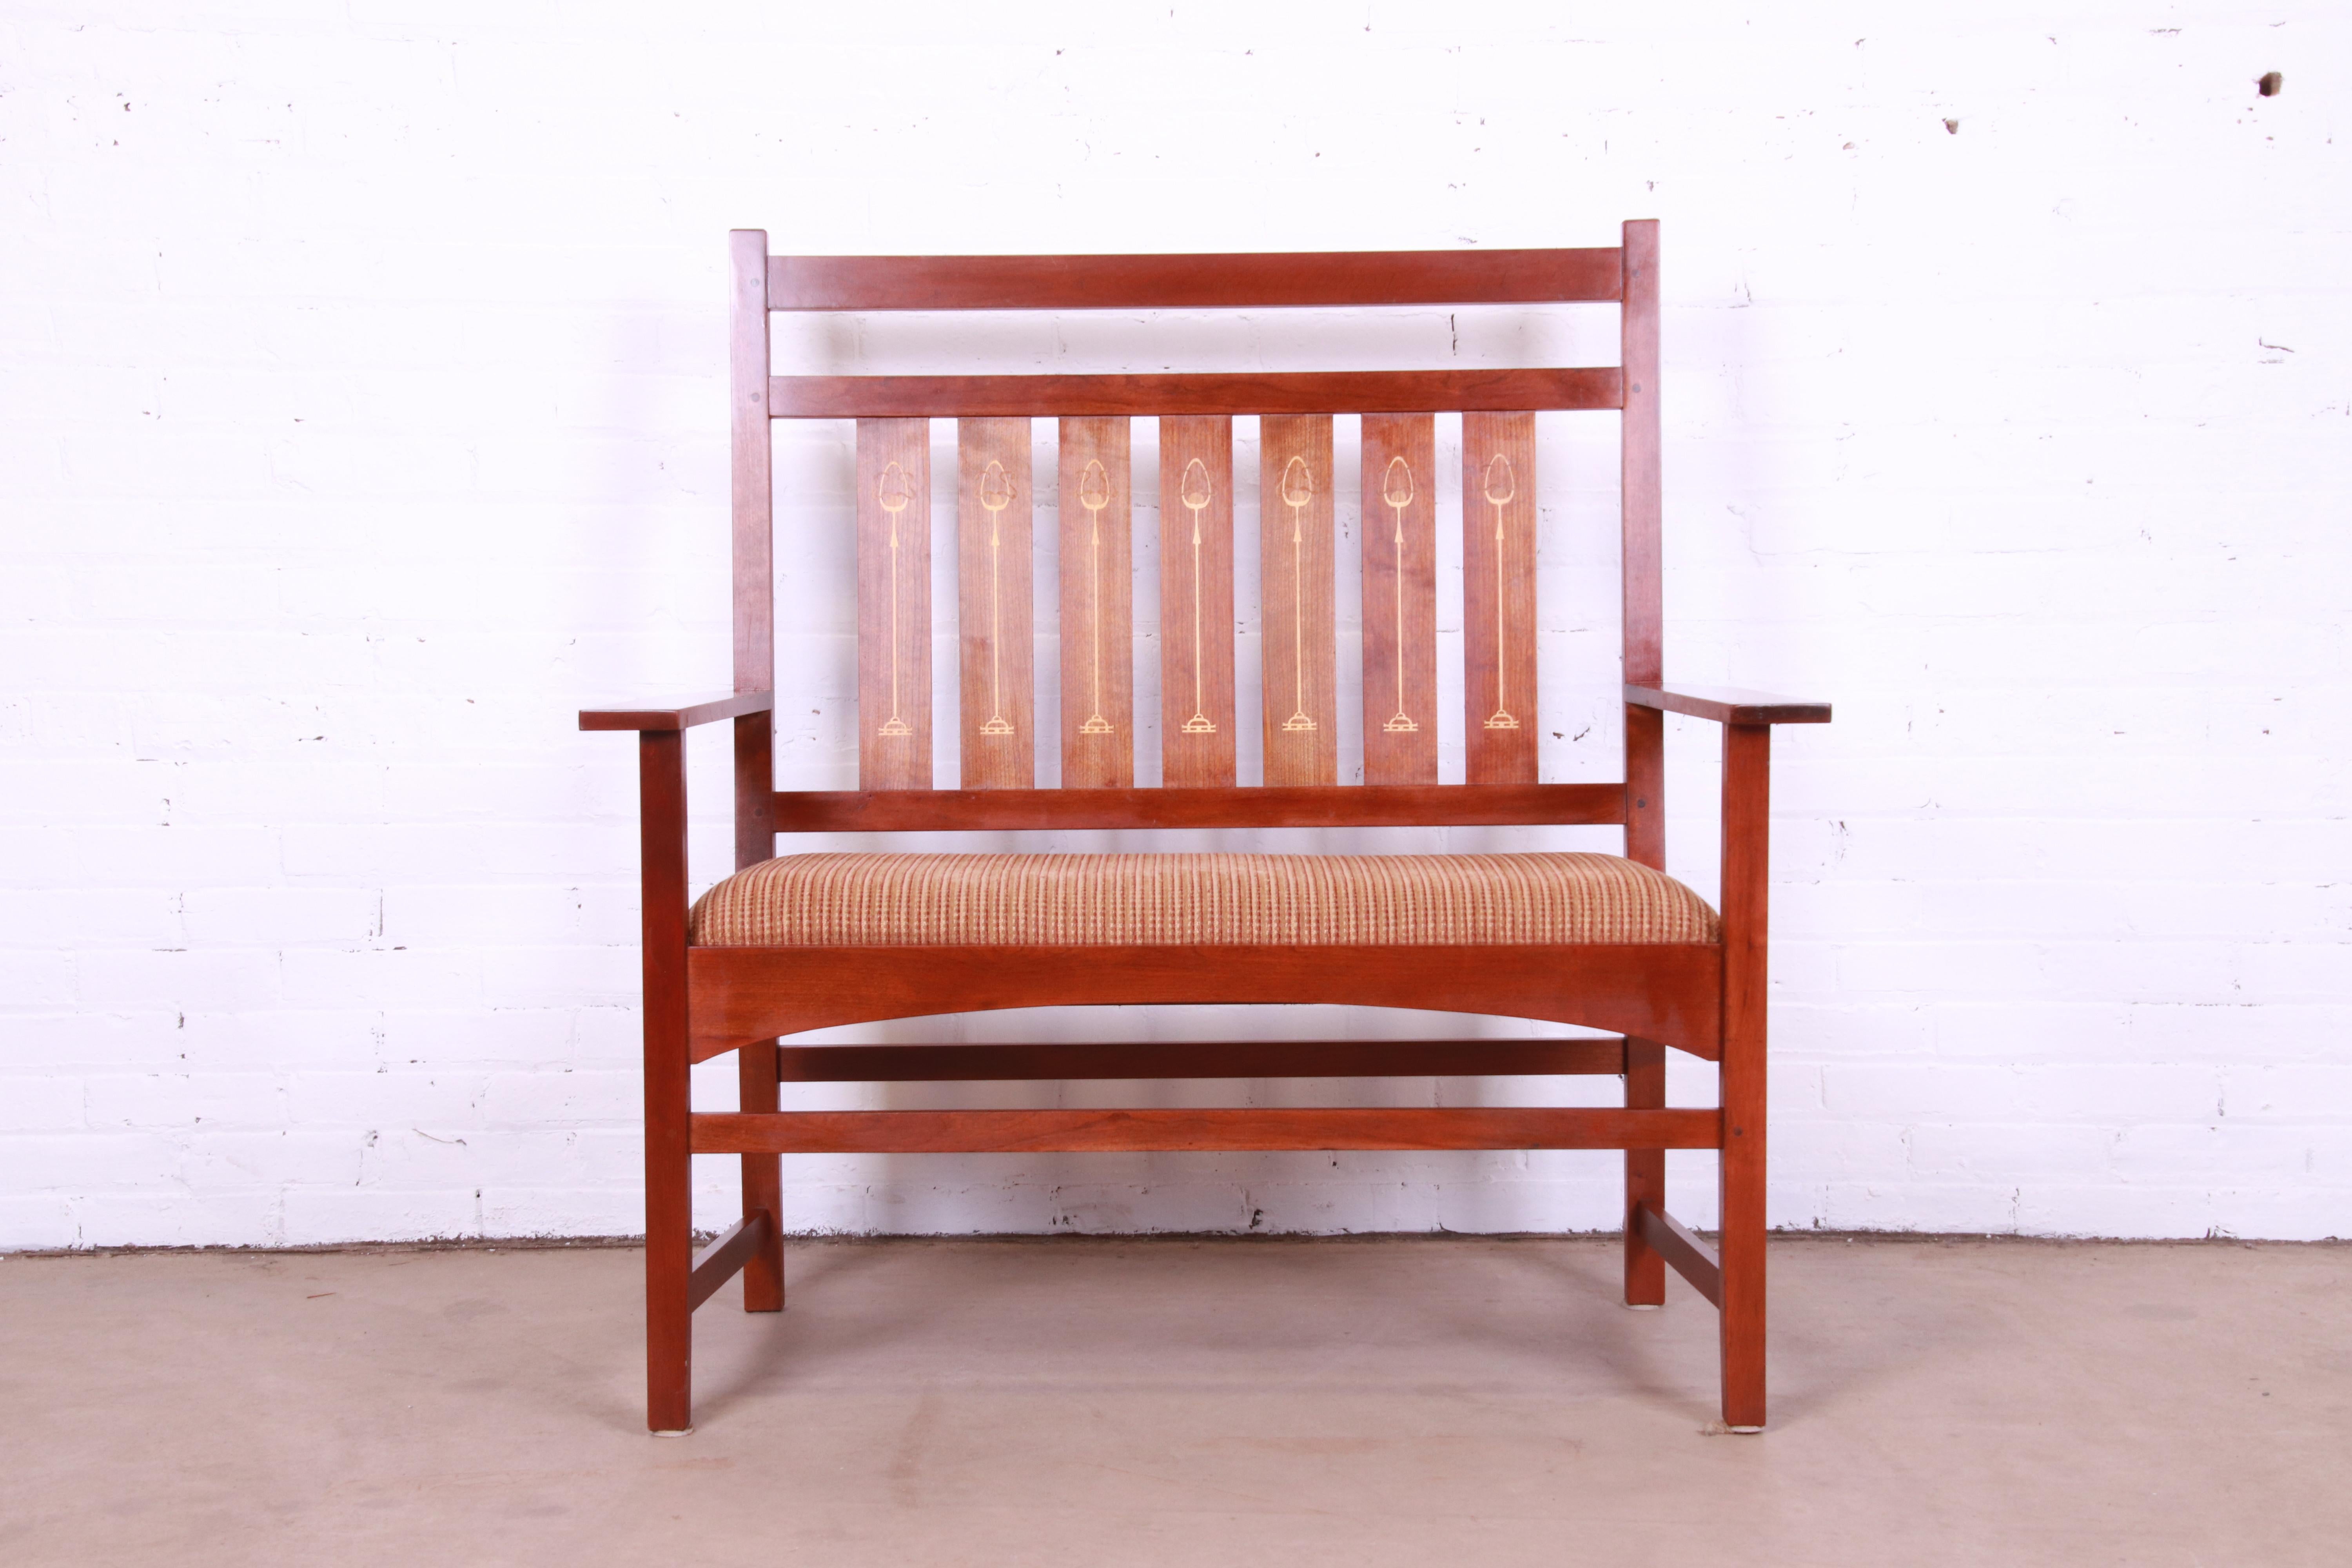 A gorgeous Mission or Arts & Crafts style bench or settee

By Stickley, 